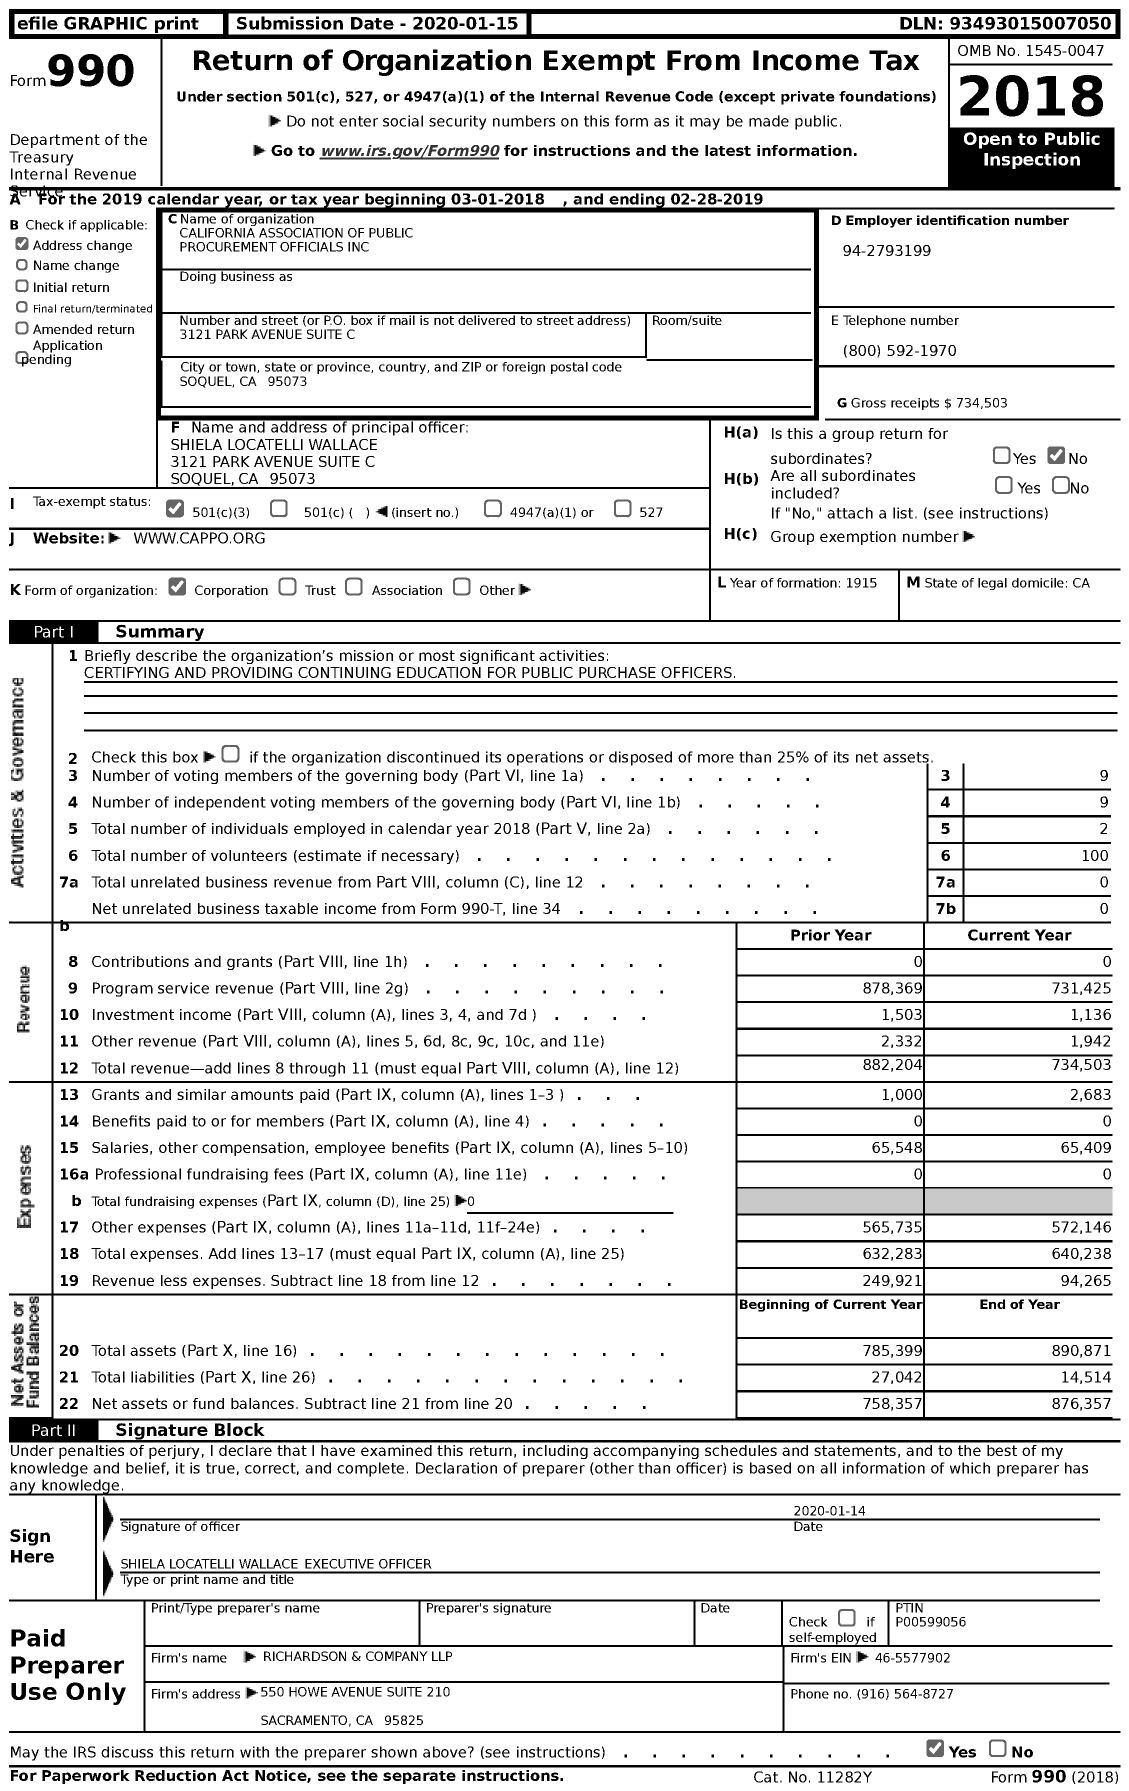 Image of first page of 2018 Form 990 for California Association of Public Procurement Officials